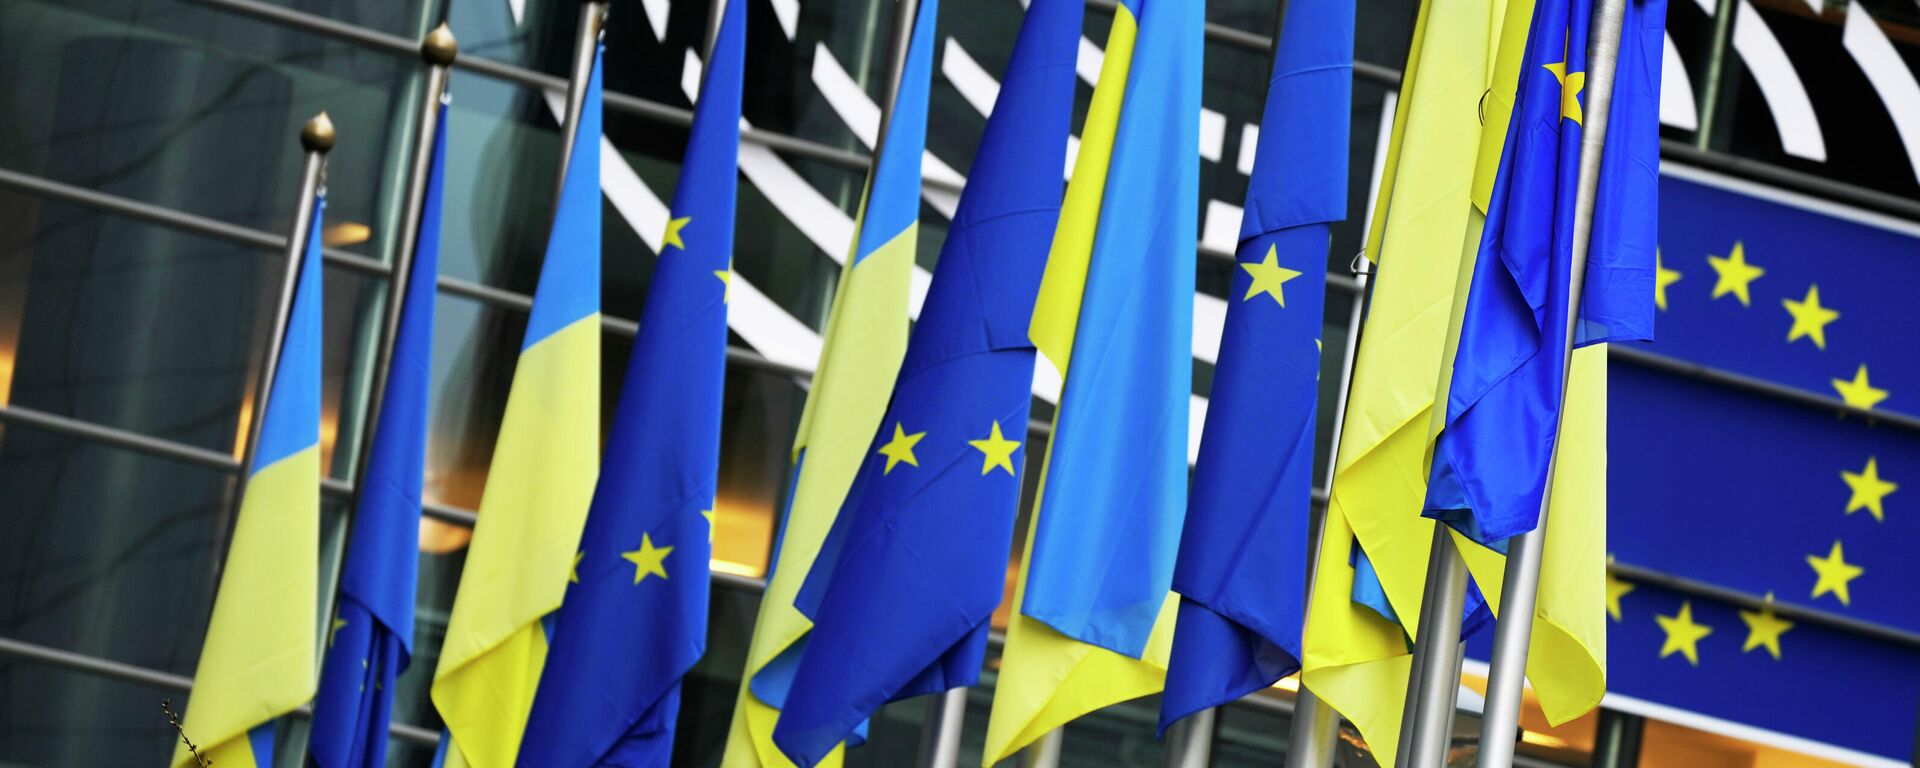 Ukraine and European Union flags hang together on the exterior of the building prior to an extraordinary plenary session on Ukraine at the European Parliament in Brussels, Tuesday, March 1, 2022 - Sputnik International, 1920, 23.05.2023